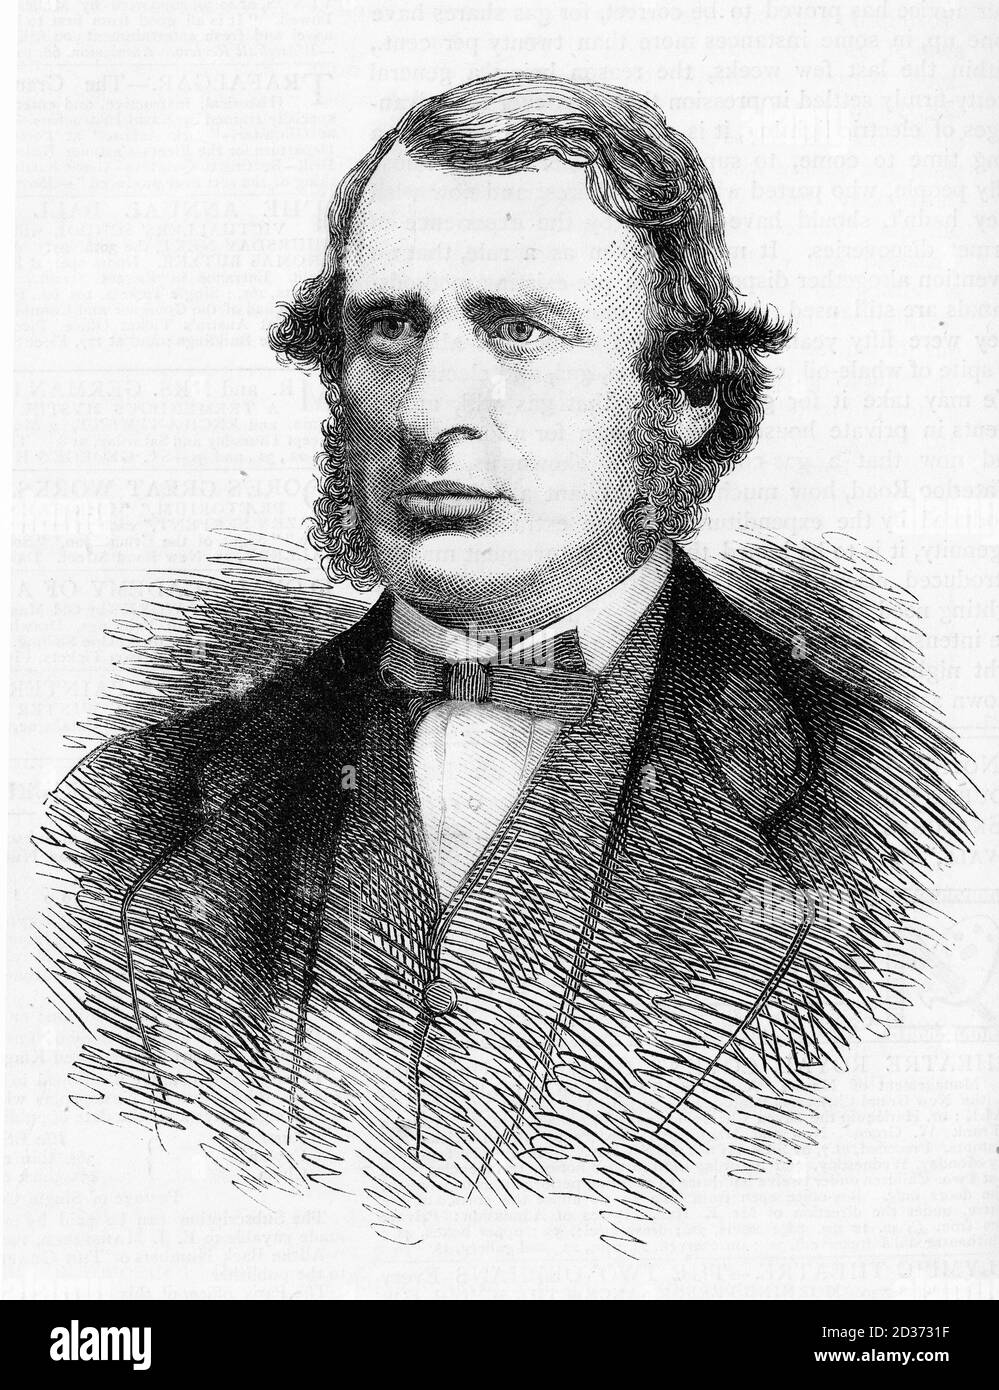 Engraved portrait of Sir James Fitzjames Stephen, 1st Baronet, KCSI (3 March 1829 – 11 March 1894)  English lawyer, judge and writer. Stock Photo